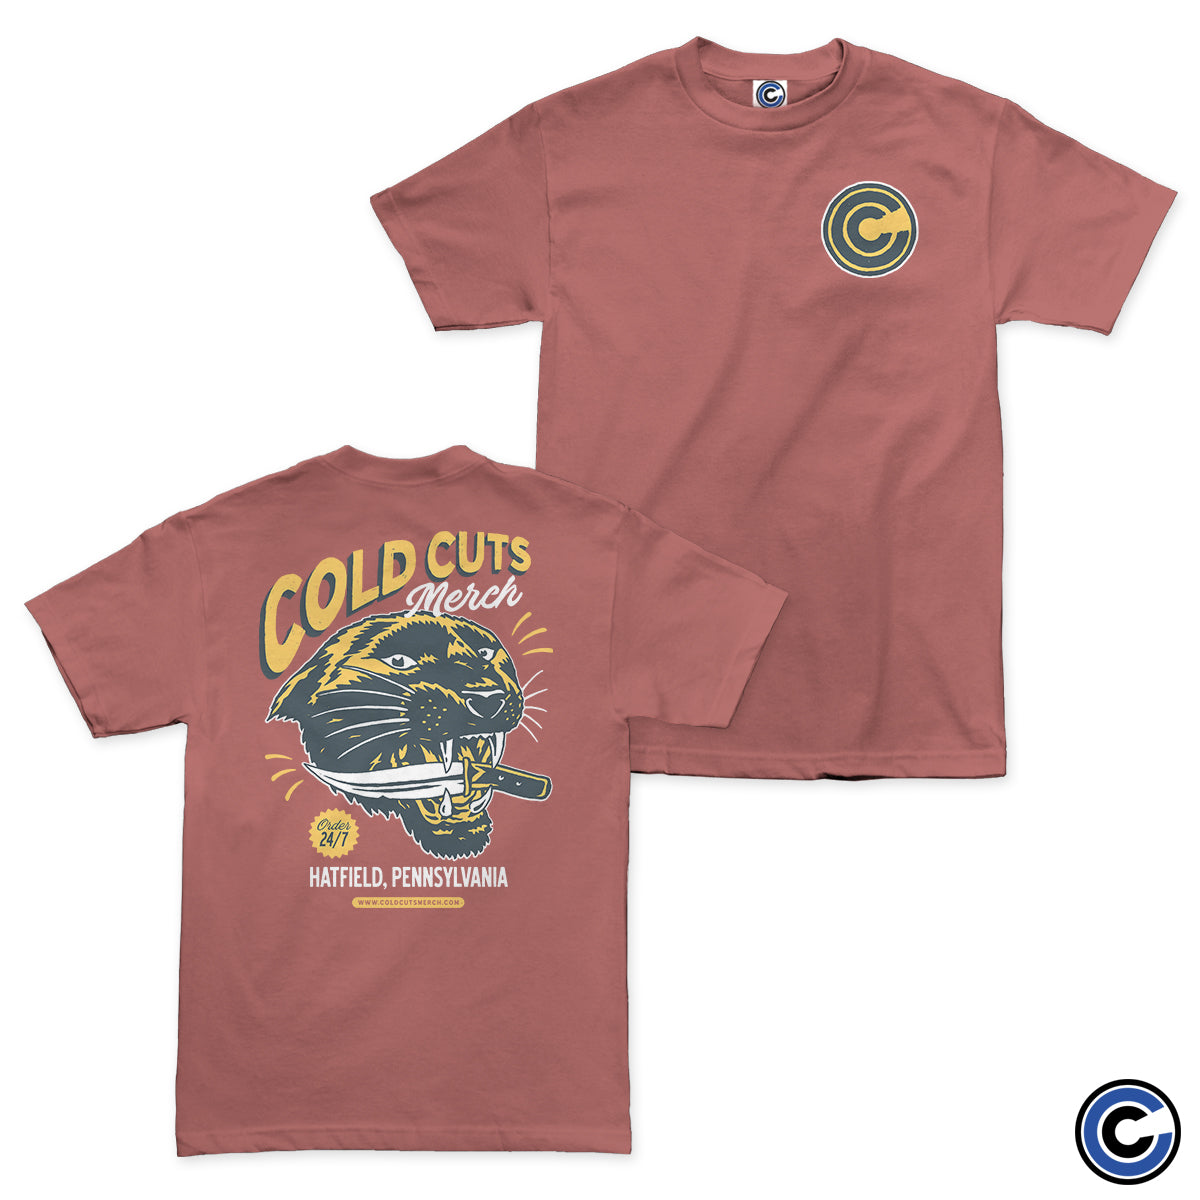 Cold Cuts "Panther" Shirt